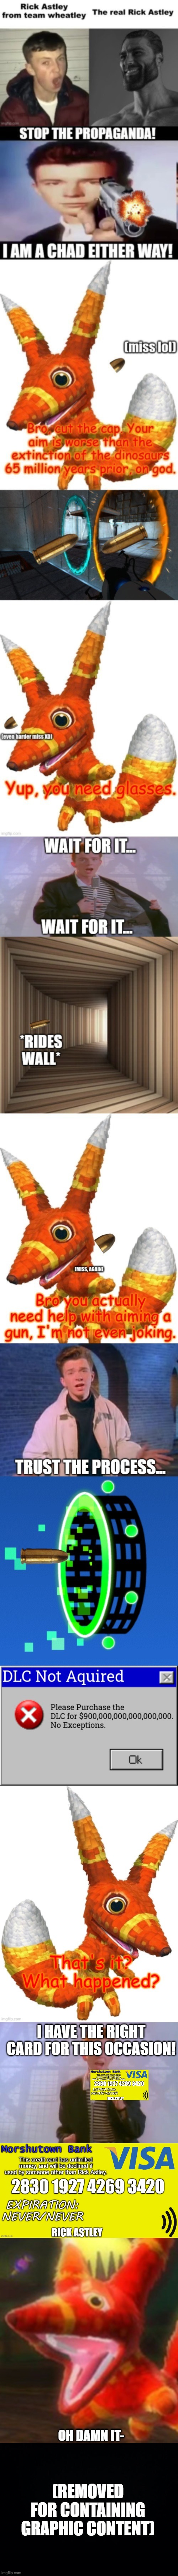 I HAVE THE RIGHT CARD FOR THIS OCCASION! OH DAMN IT-; (REMOVED FOR CONTAINING GRAPHIC CONTENT) | image tagged in rick astley,viva pinata pretztail,black background | made w/ Imgflip meme maker